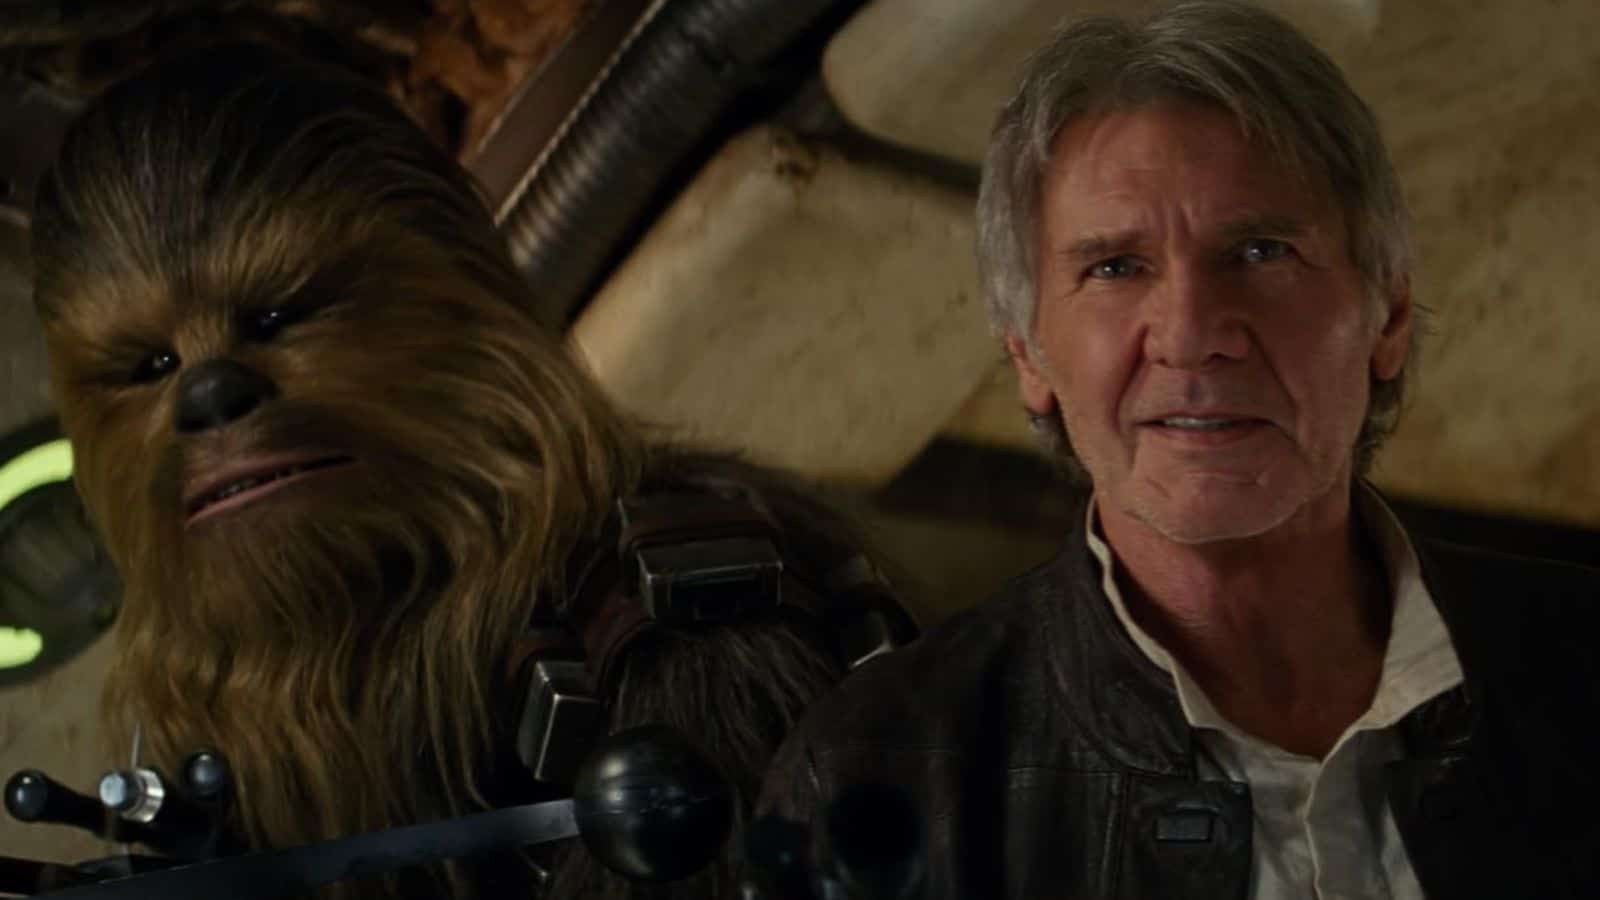 Han and Chewie